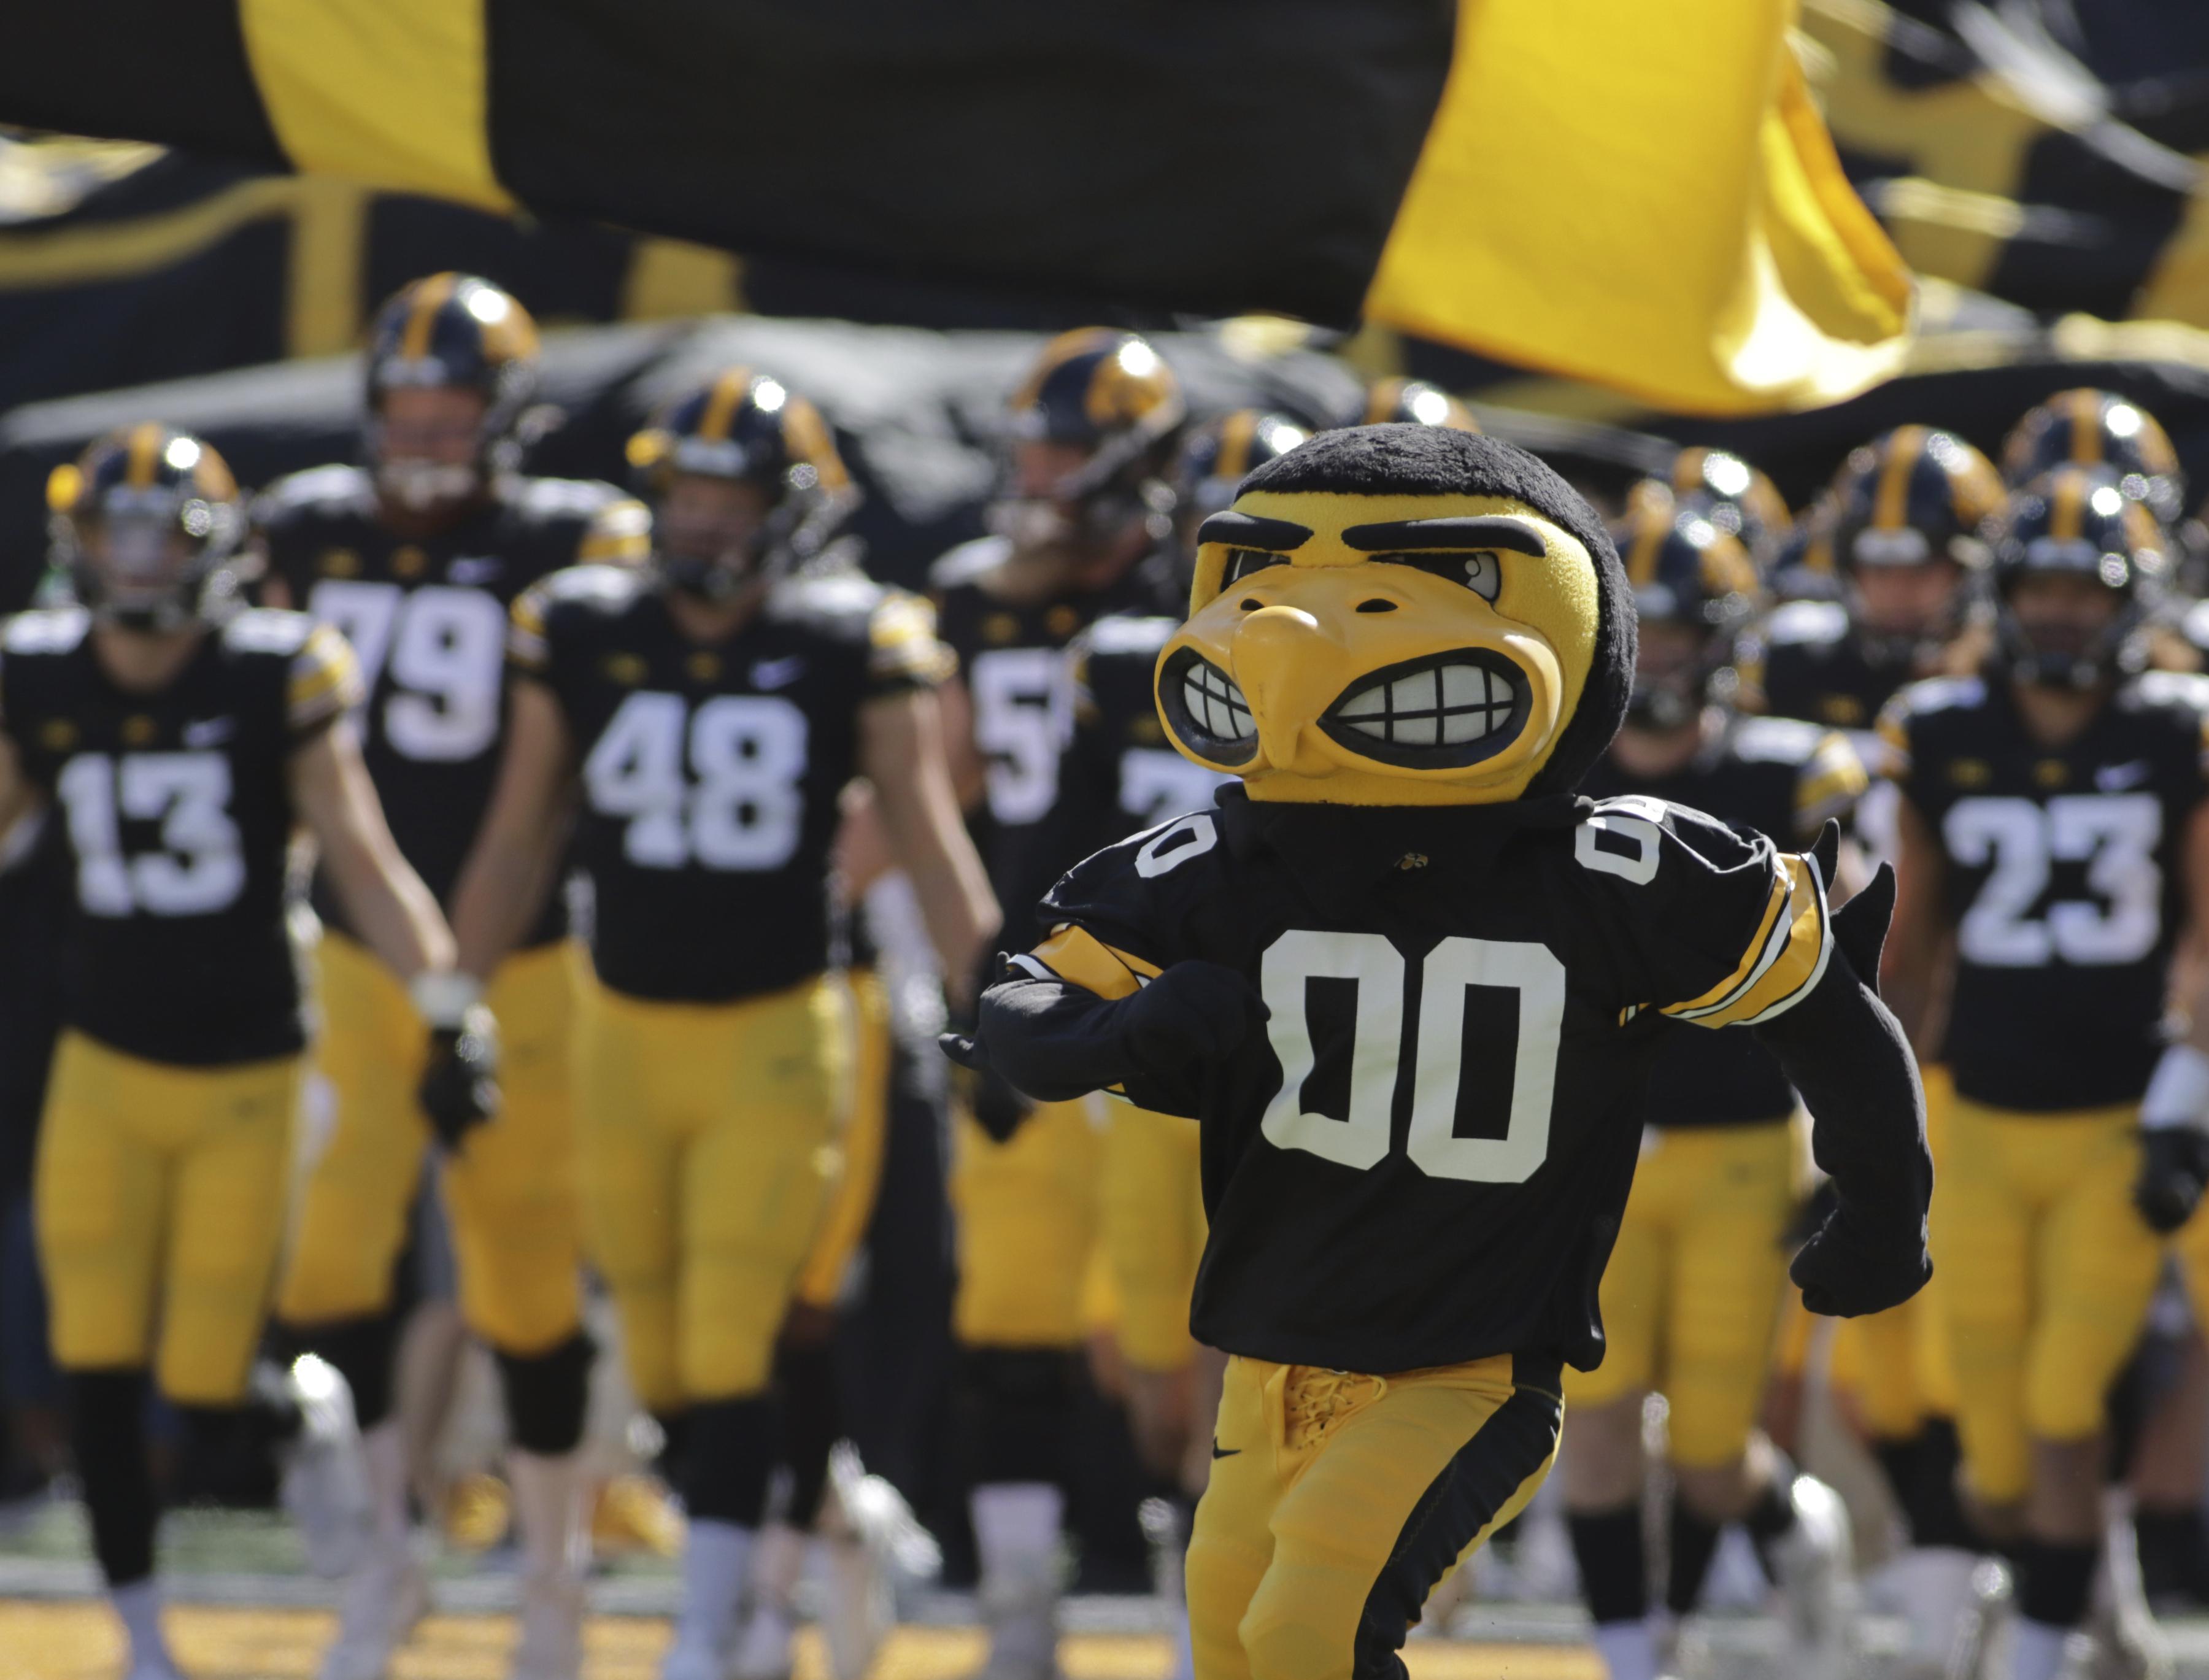 Iowa Hawkeyes baseball under investigation by racing and gaming commission  for potential gambling: report